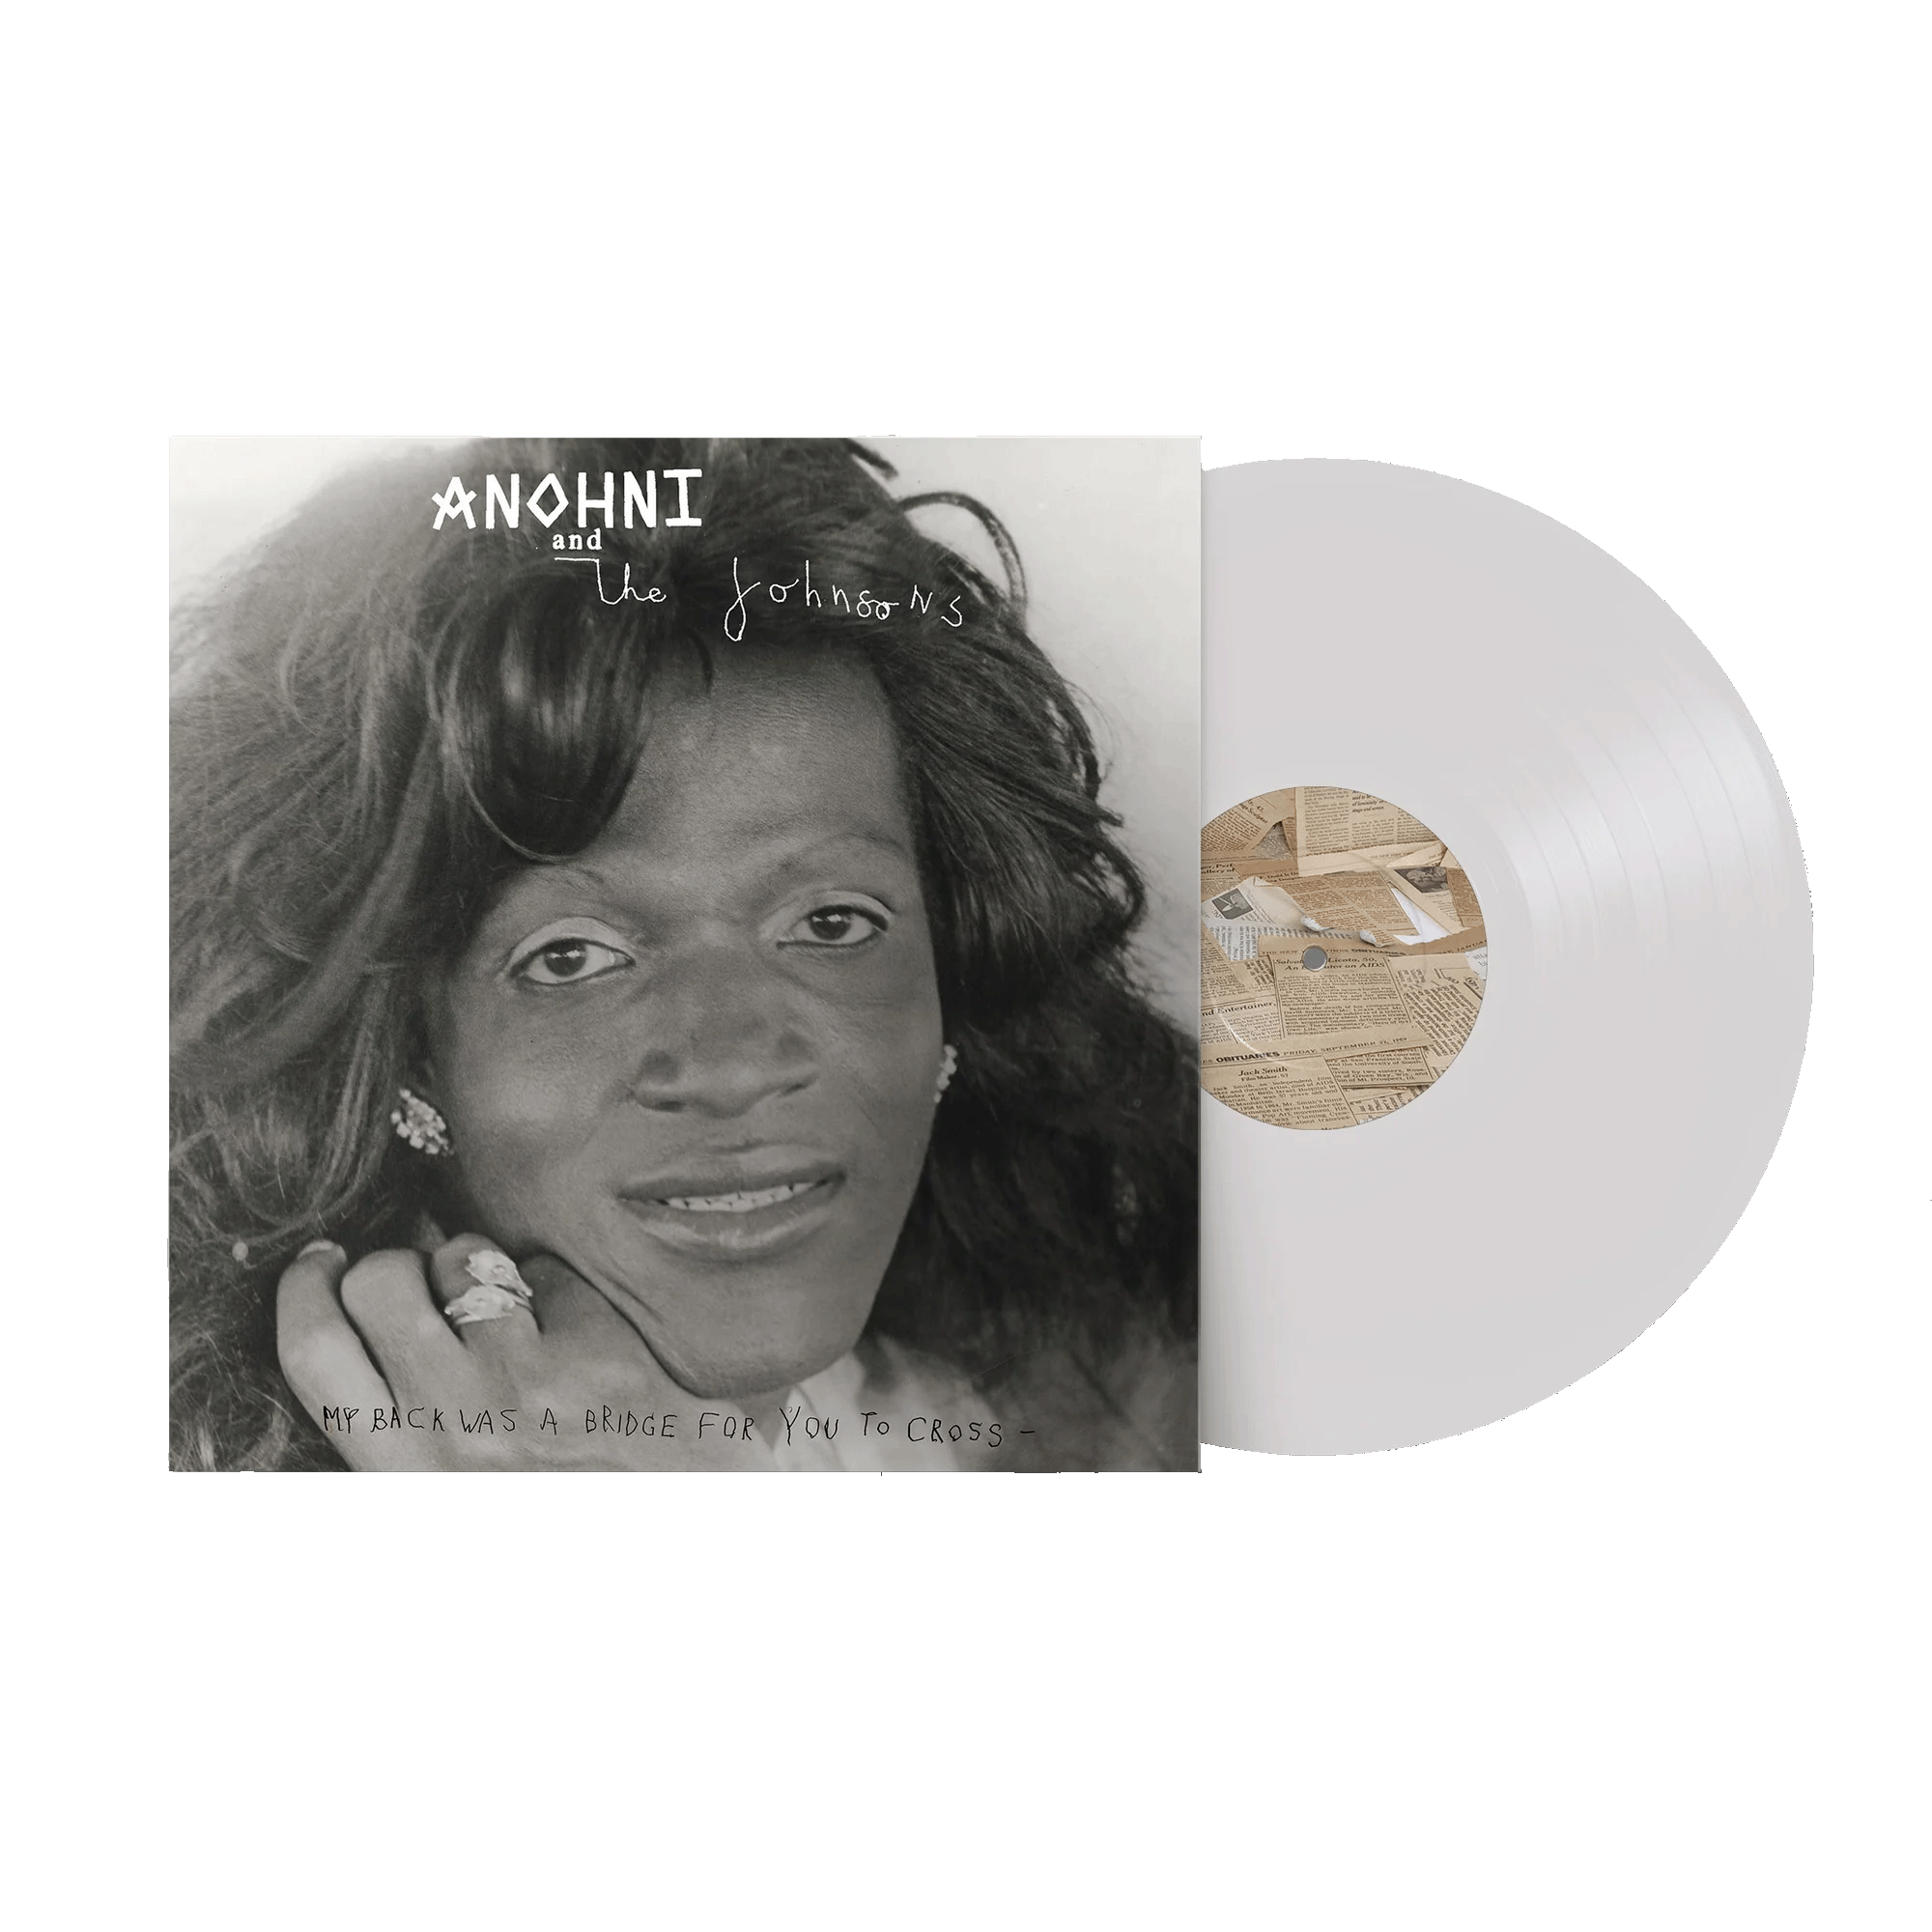 My Back Was A Bridge For You To Cross: Limited White Vinyl LP